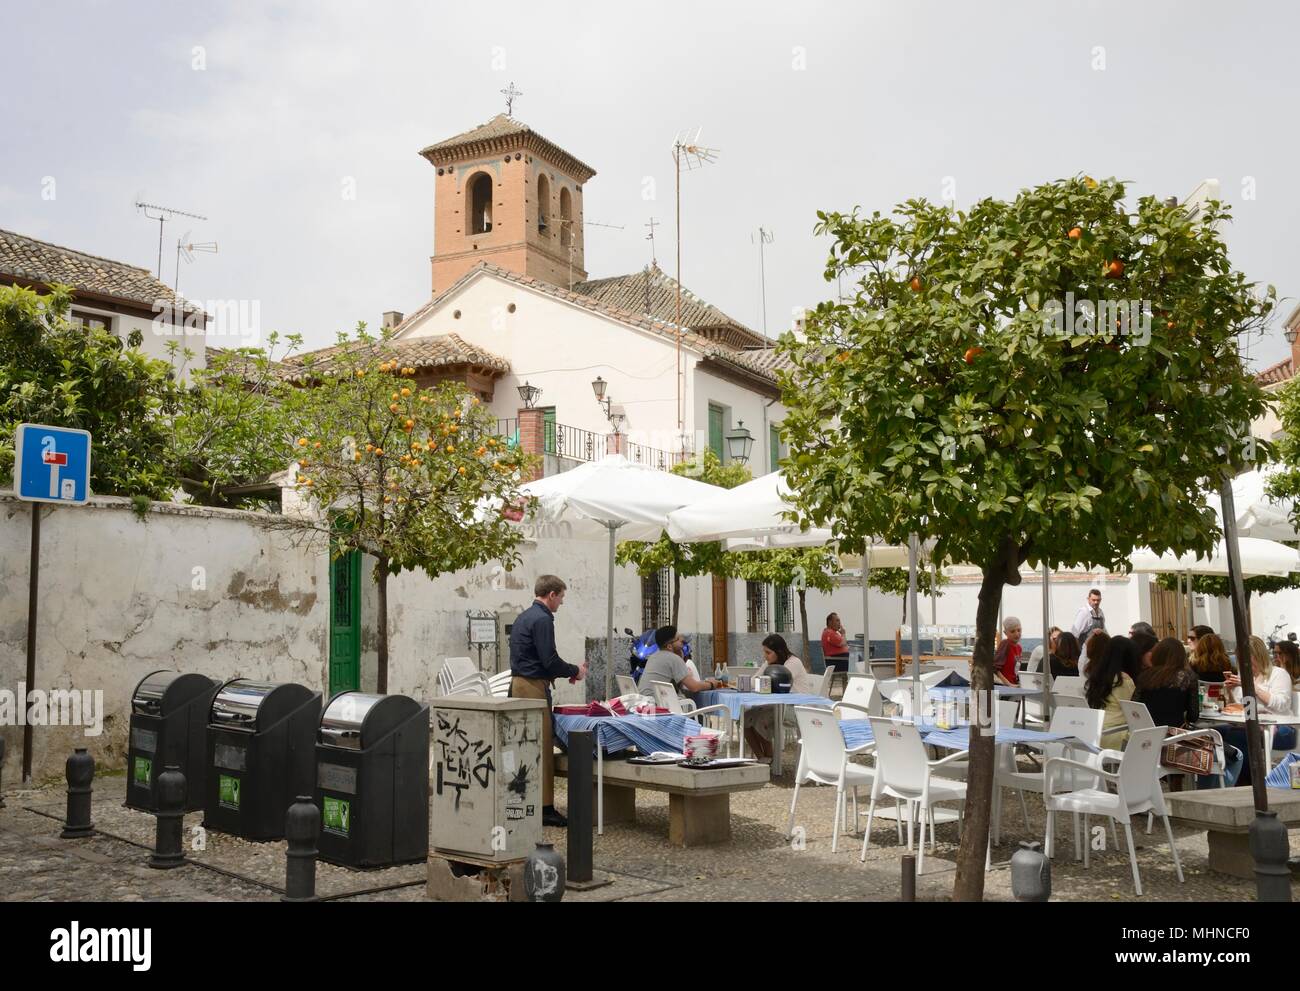 People at outdoors pub located in plaza of the popular Albaicin district, Granada, Andalusia, Spain. Stock Photo